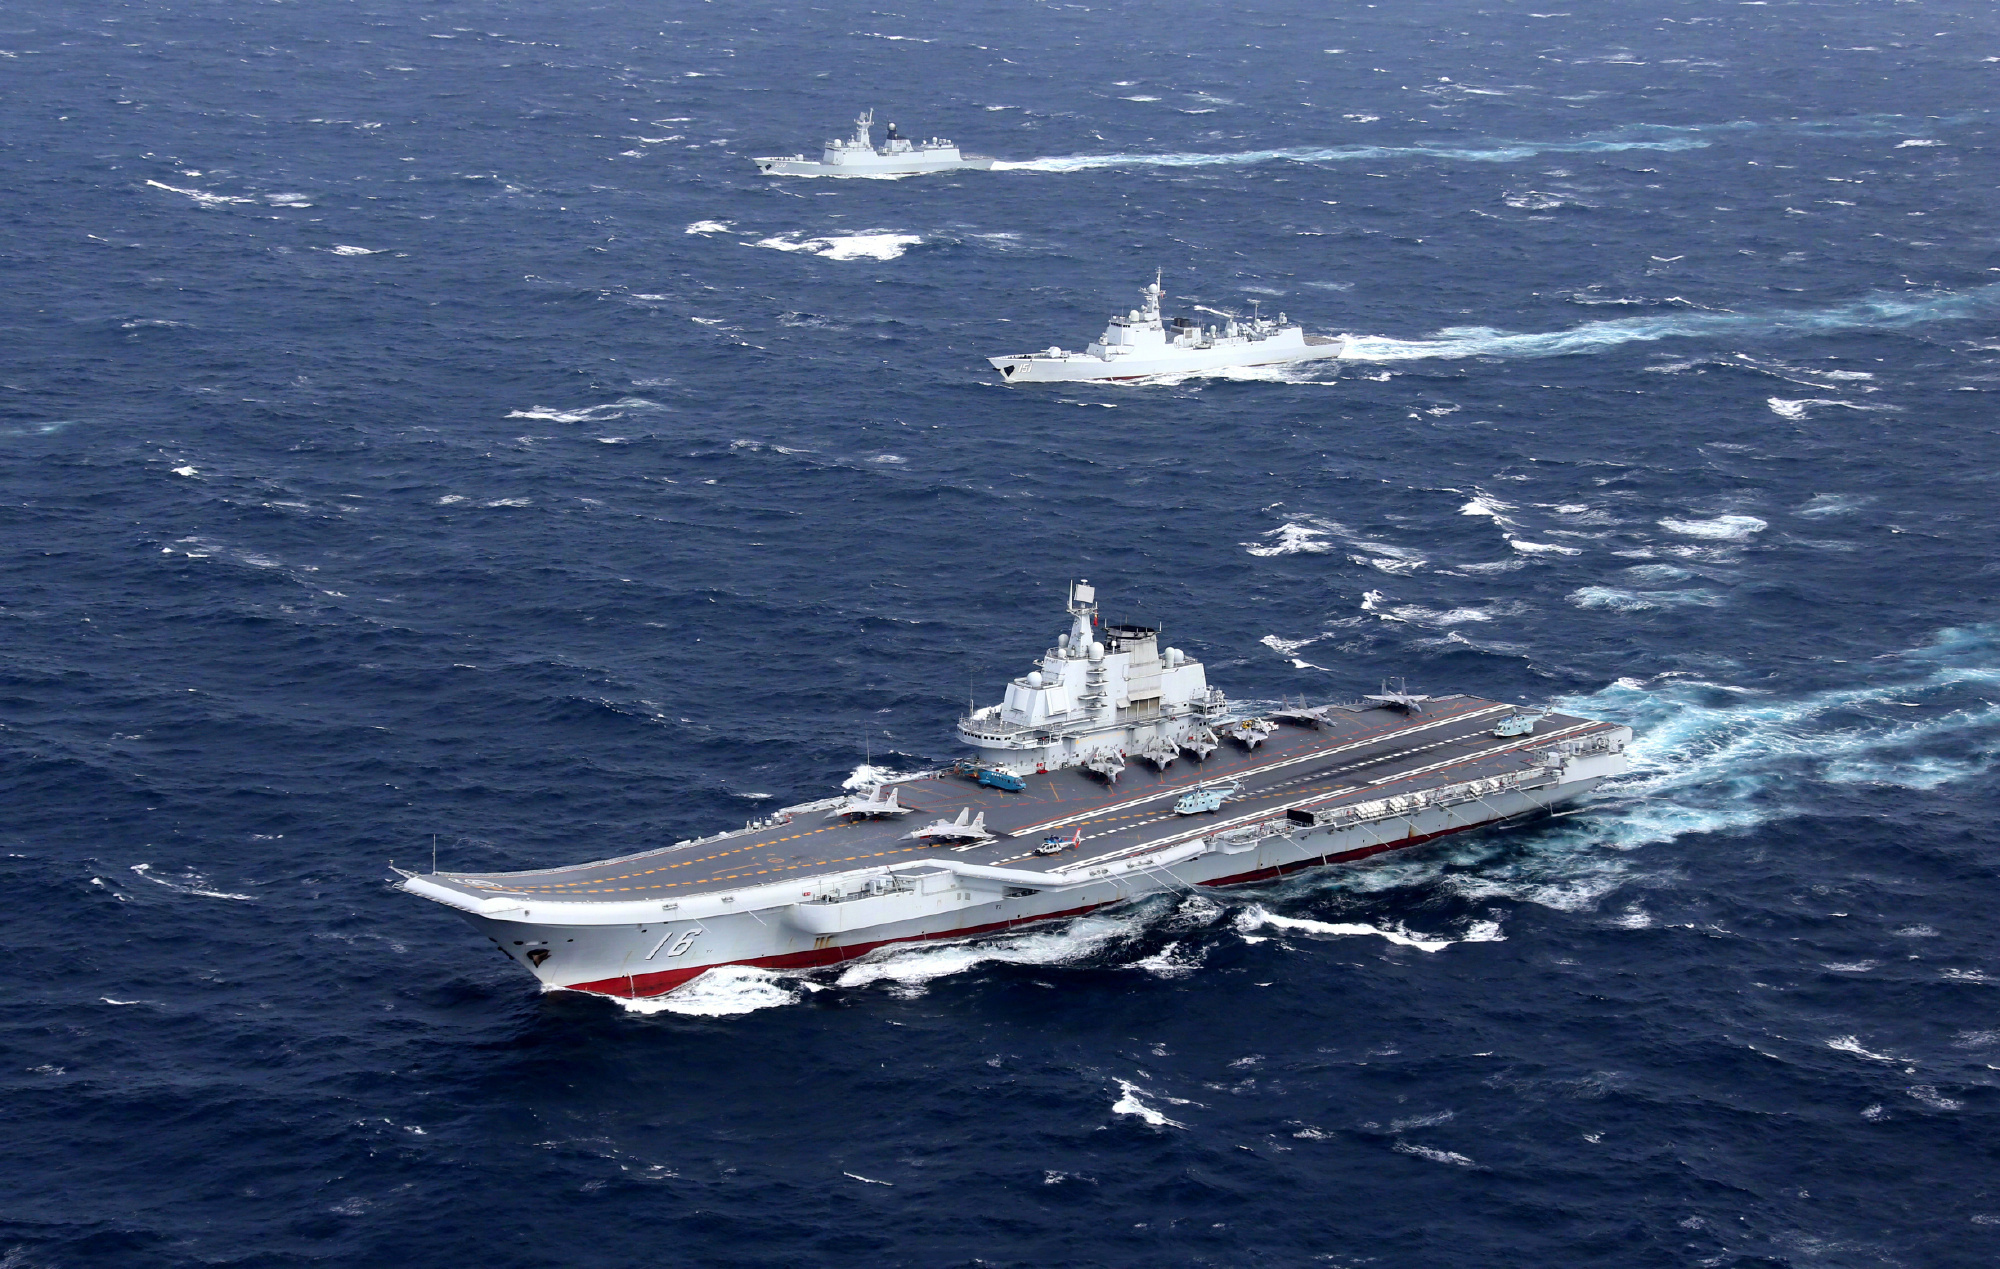 General 2000x1269 People's Liberation Army Navy Type 001 aircraft carrier military vehicle military water sea waves military aircraft ripples frontal view